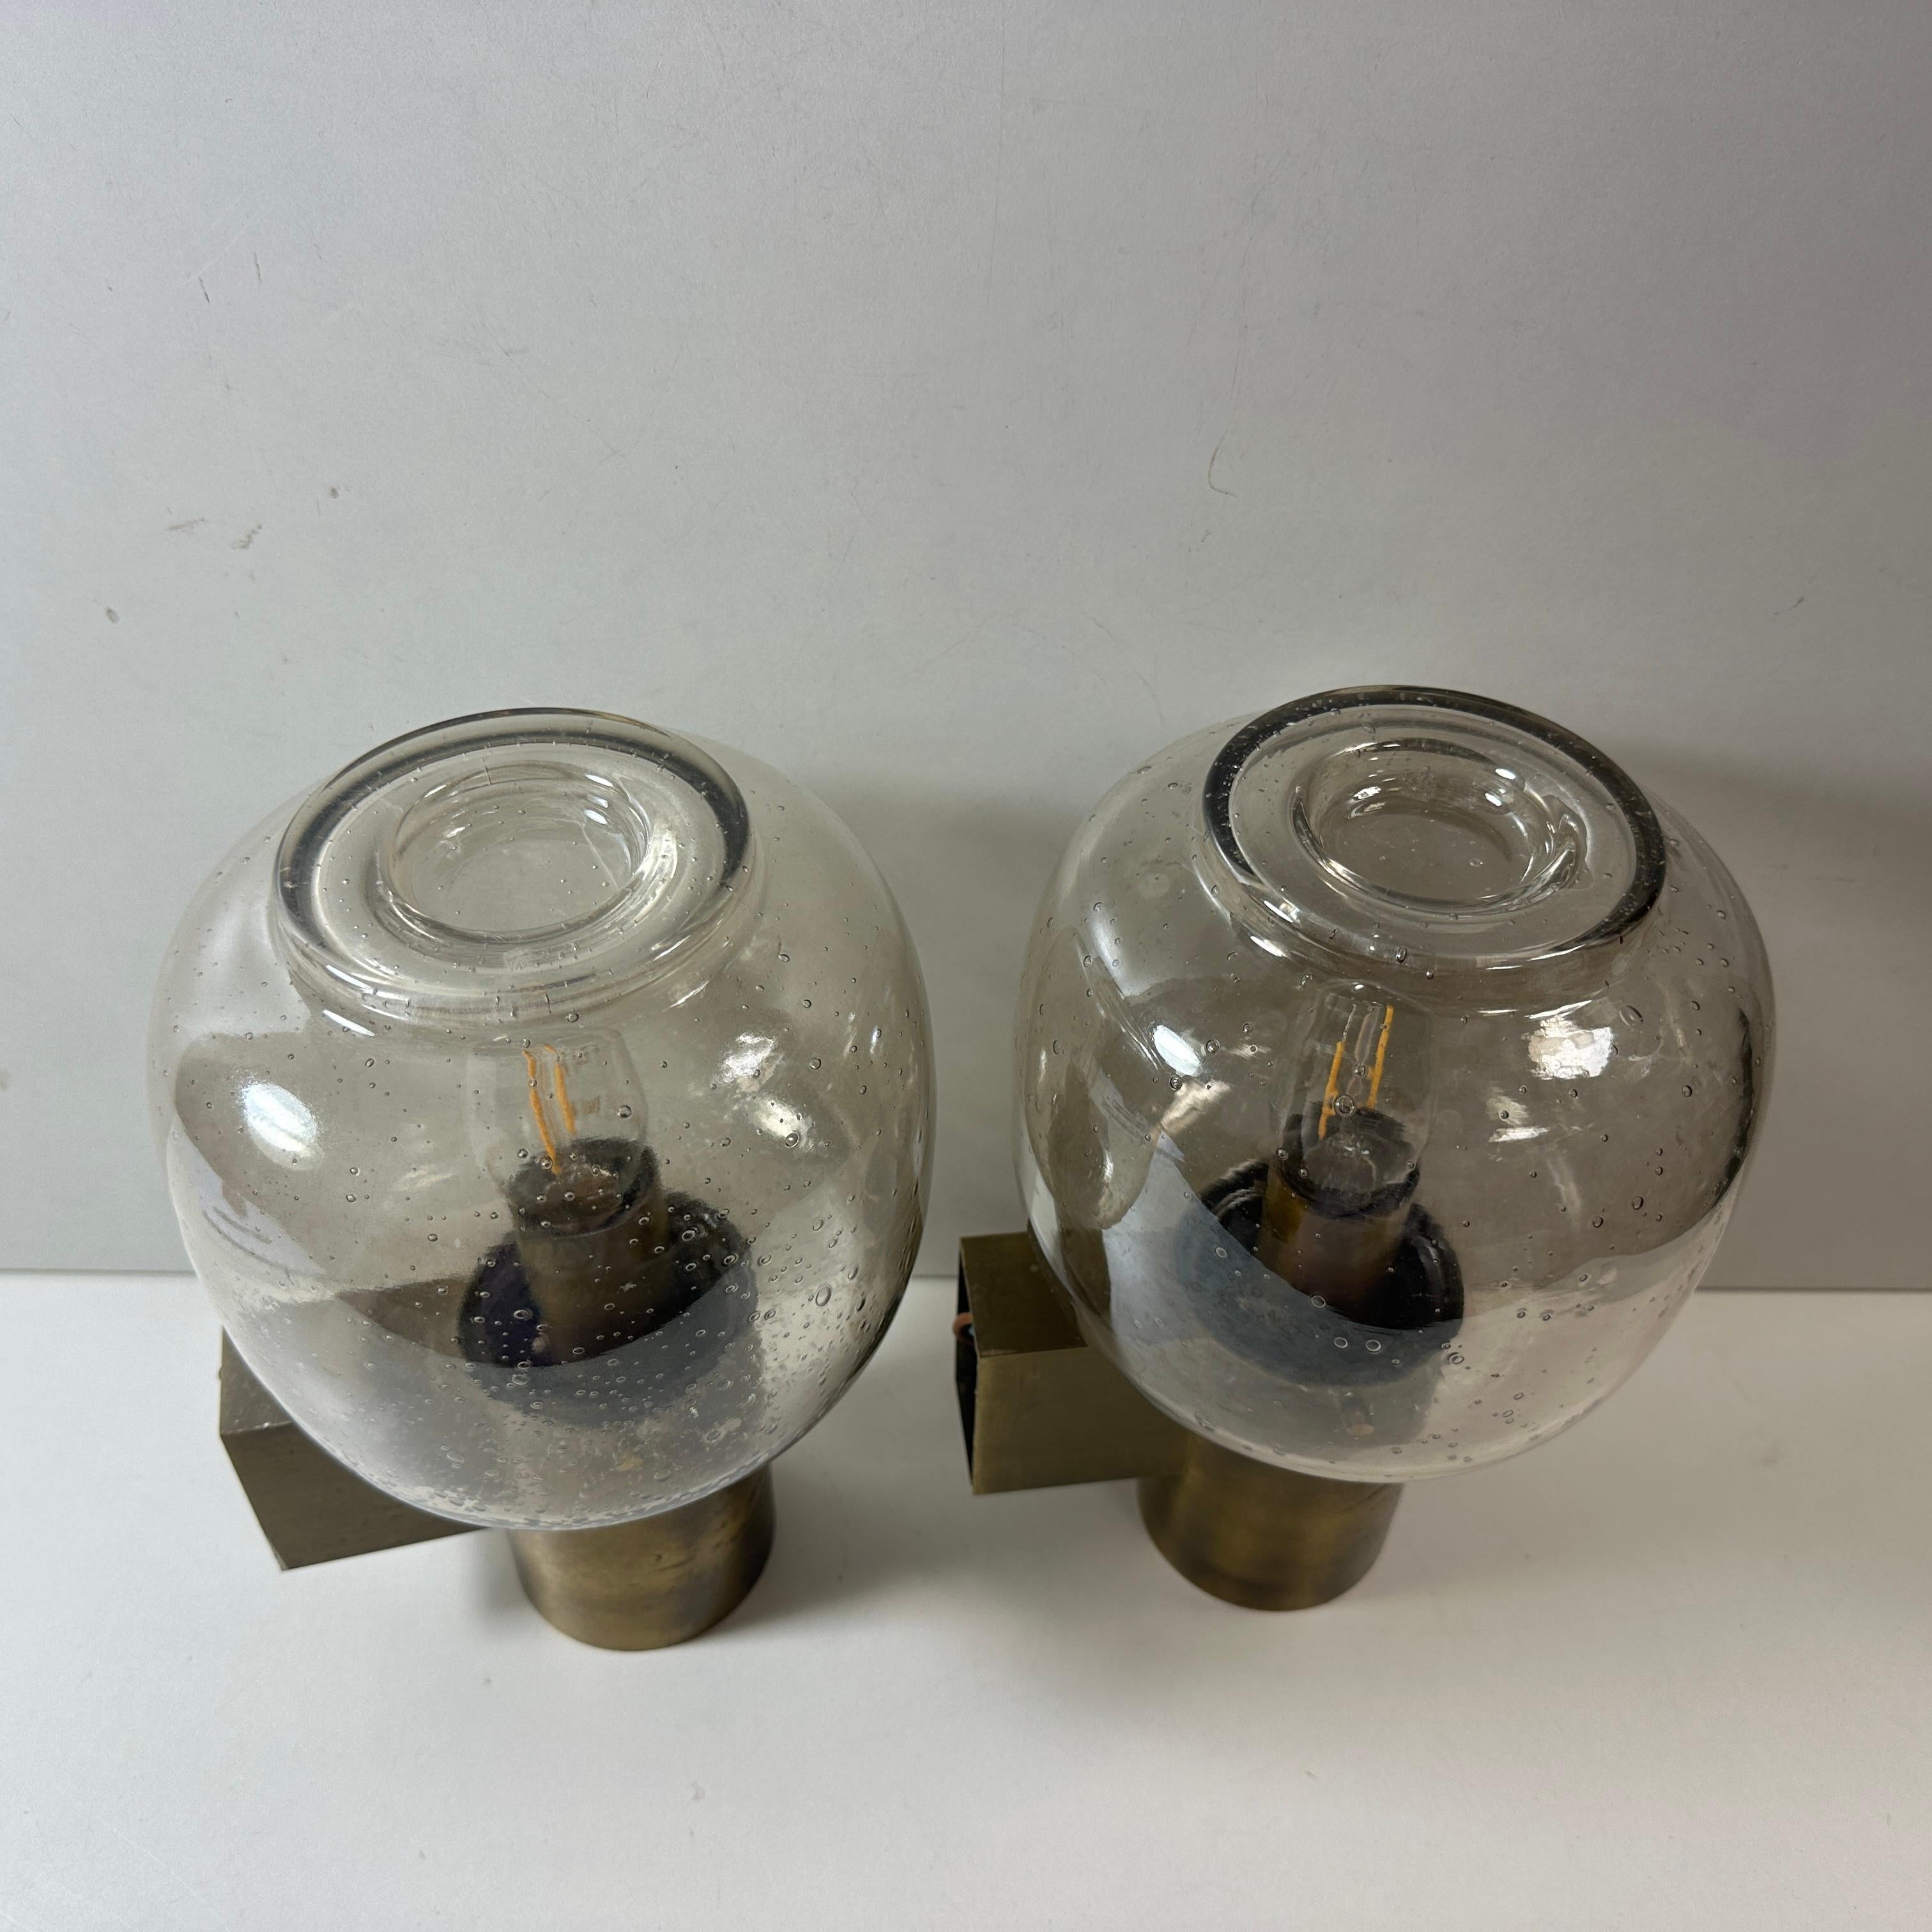 Pair of 1960s Wall Sconces in the Style of Hans - Agne Jakobsson, Skandinavia For Sale 9